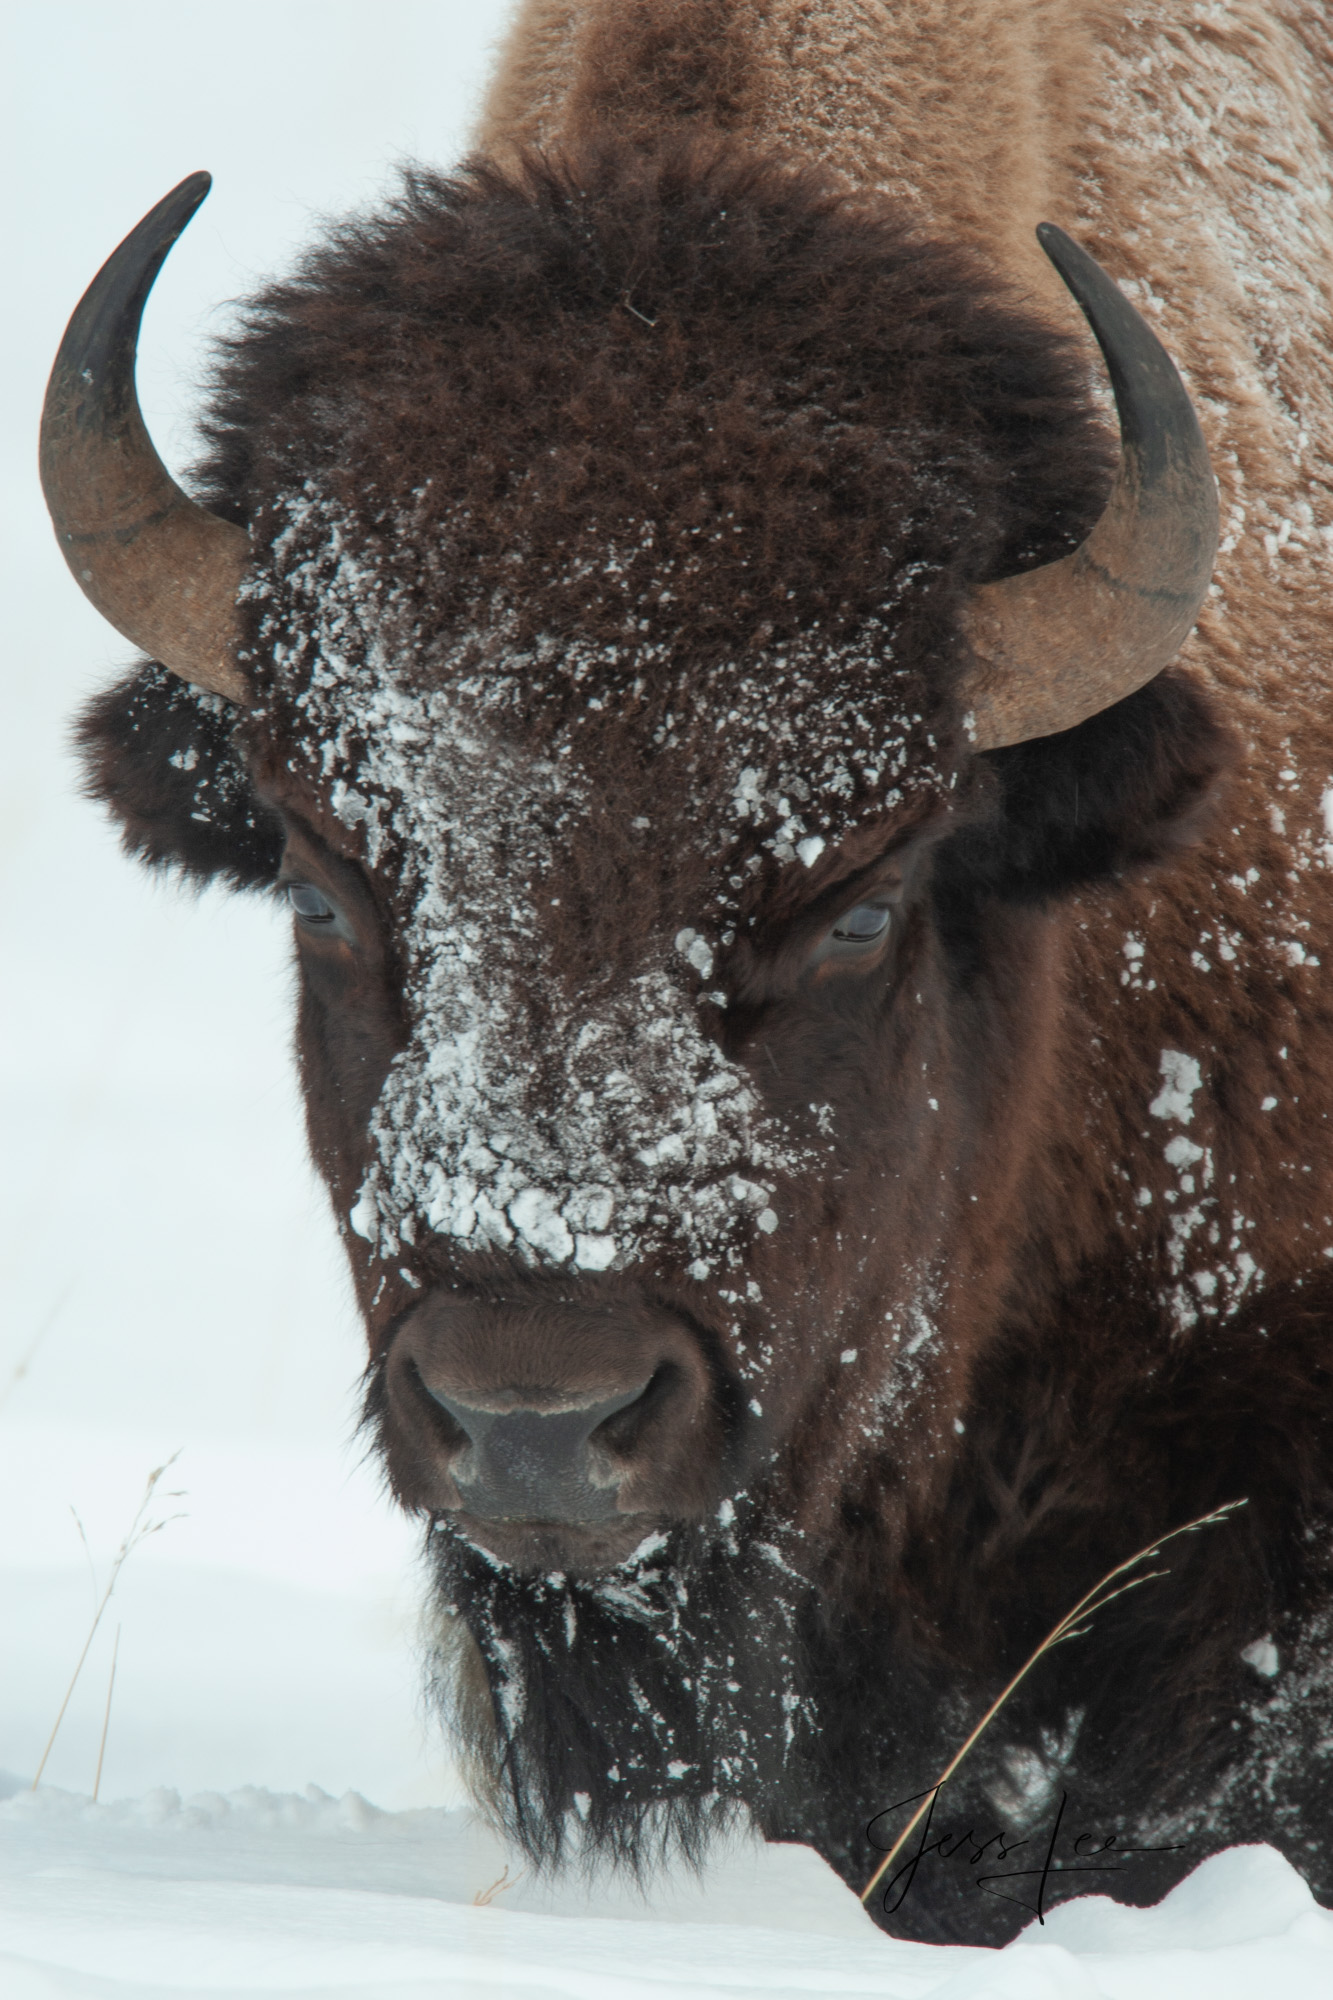 Yellowstone Bison or American Buffalo.. A Limited Edition of 800 Prints. These Snowy Faced Bison fine art wildlife photographs...